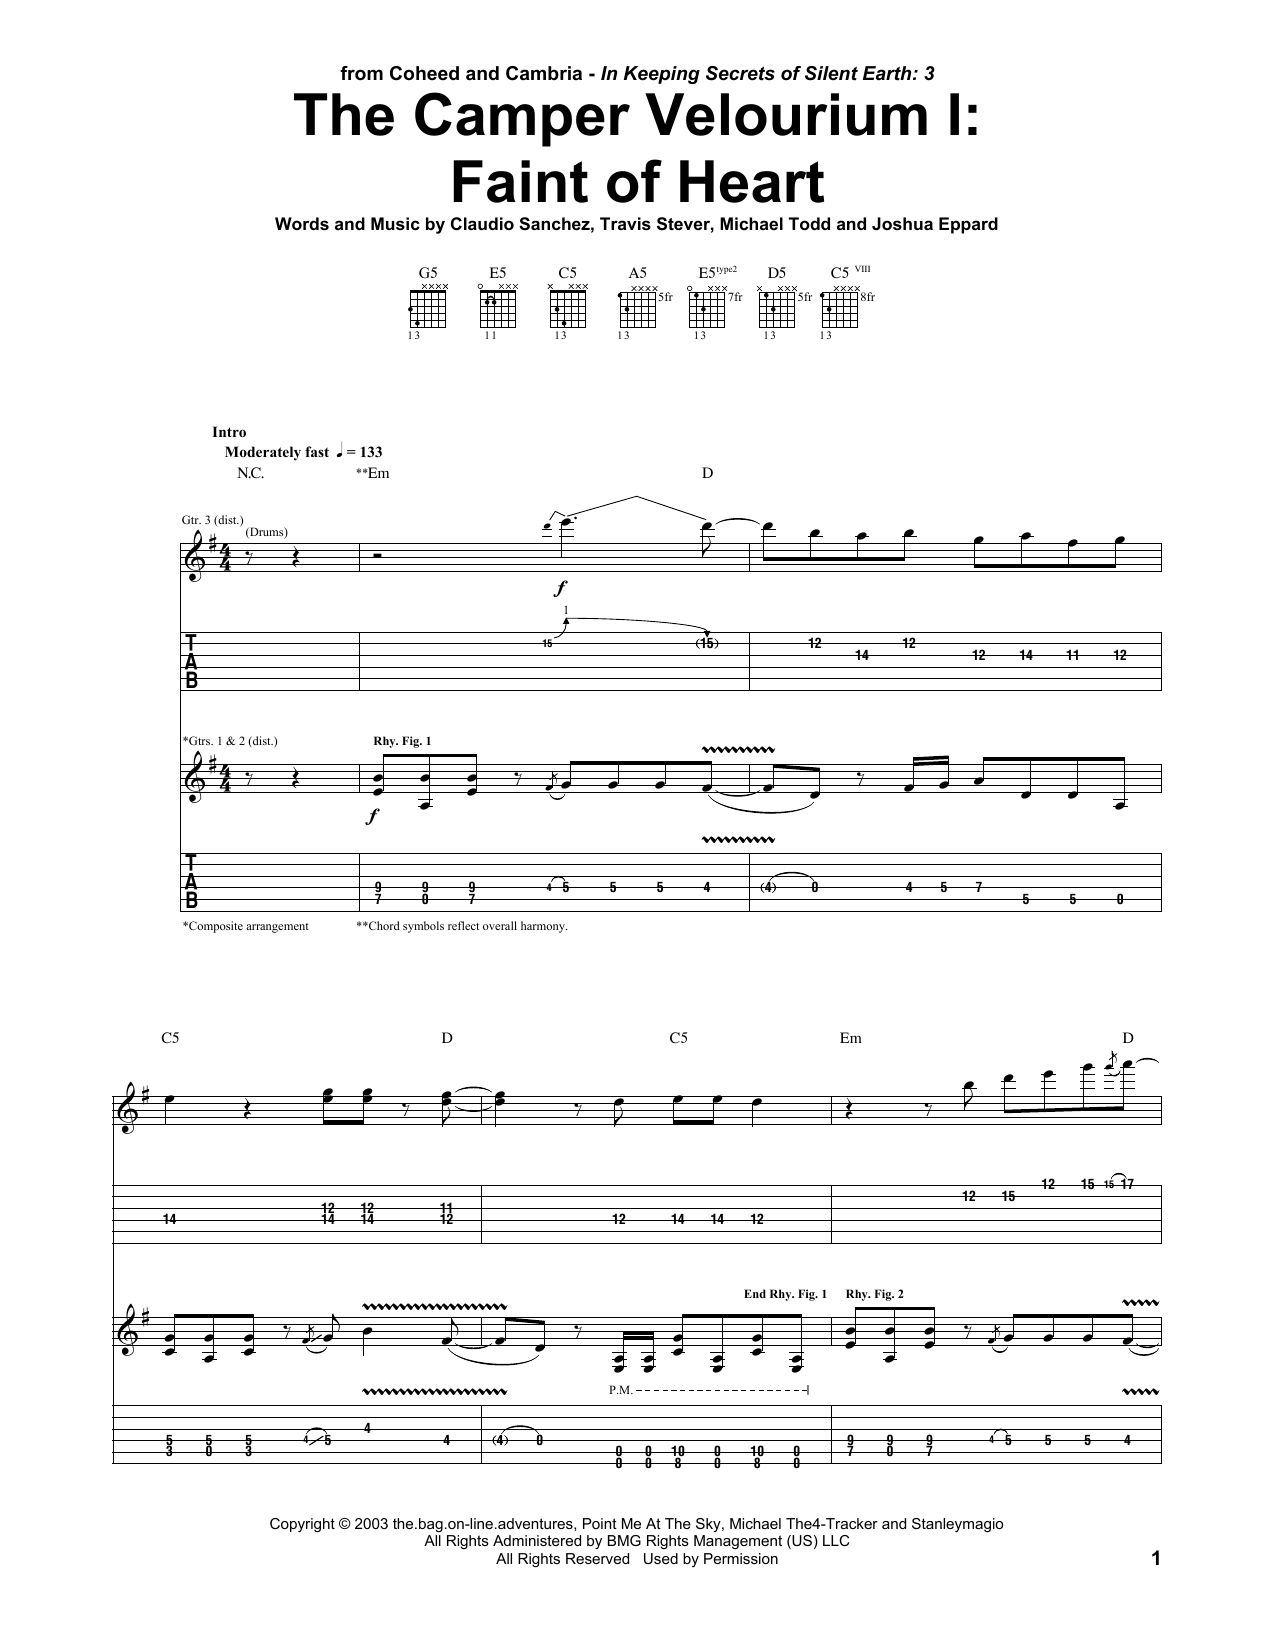 Download Coheed And Cambria The Camper Velourium I: Faint Of Heart Sheet Music